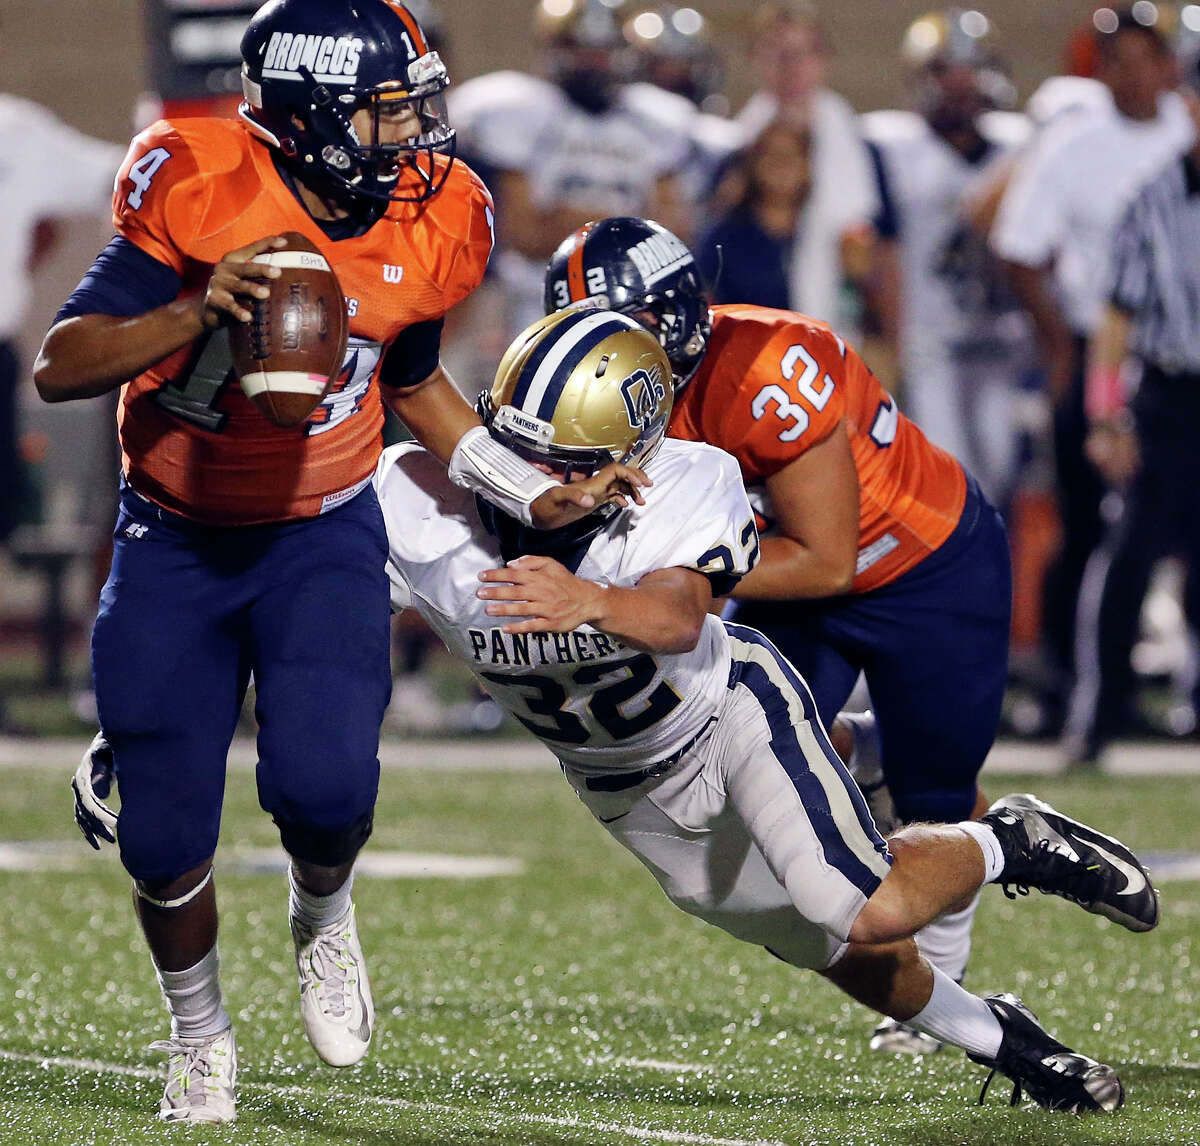 Brandeis’ Paul Lozano looks for running room around O’Connor’s Darren Jasso during first half action Friday Oct. 24, 2014 at Farris Stadium. Lozano was sacked on the play.